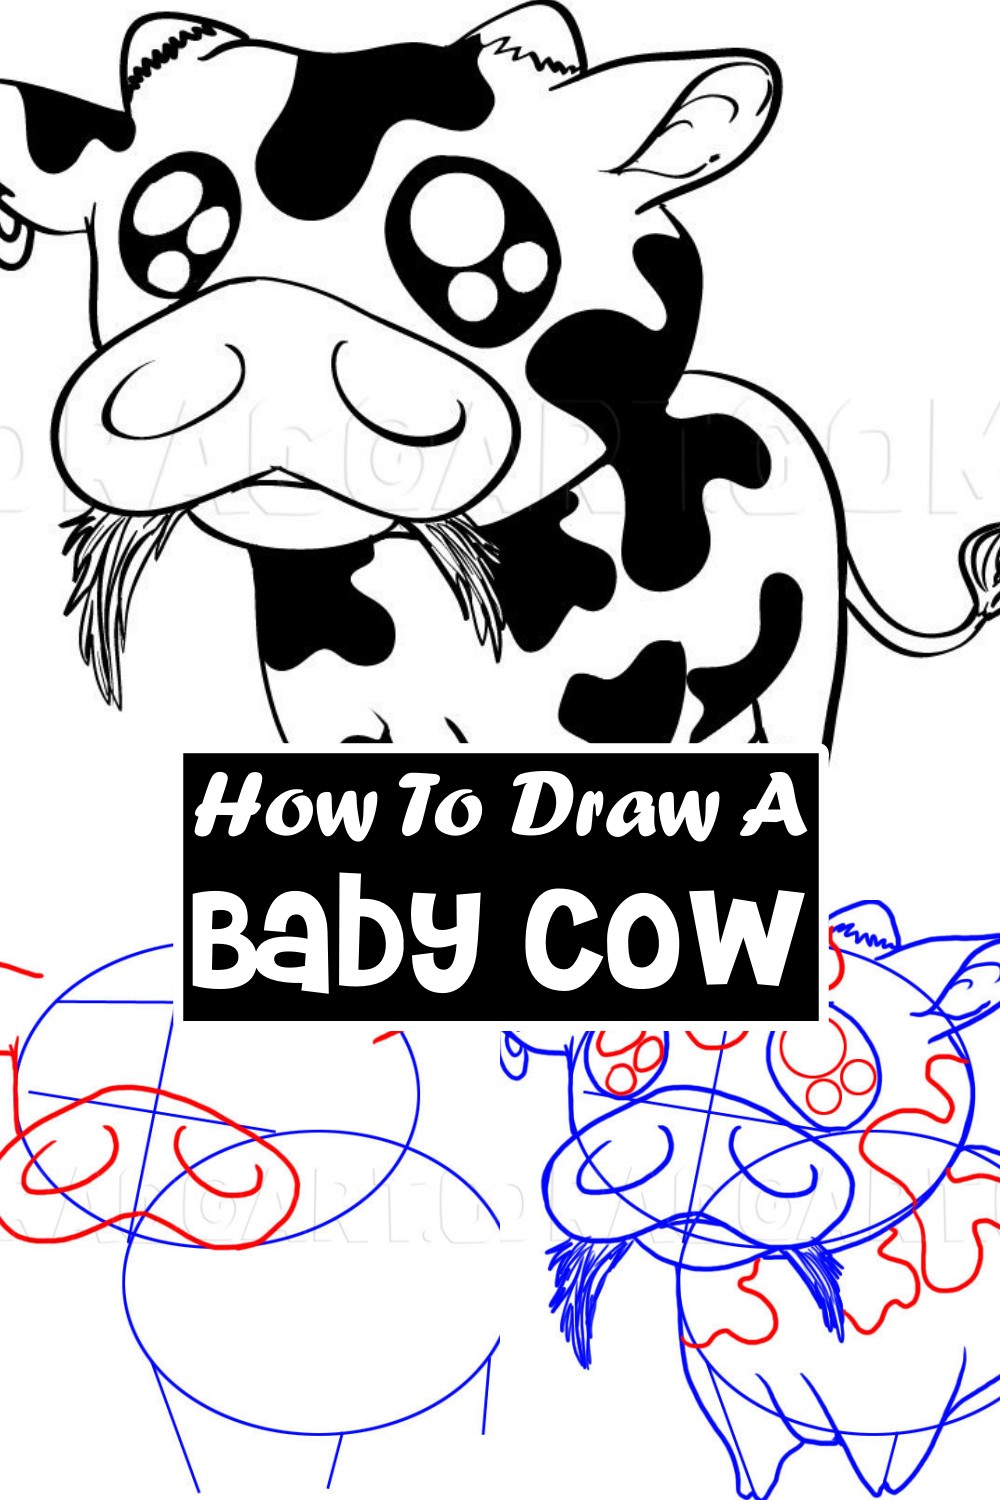 How To Draw A Baby Cow